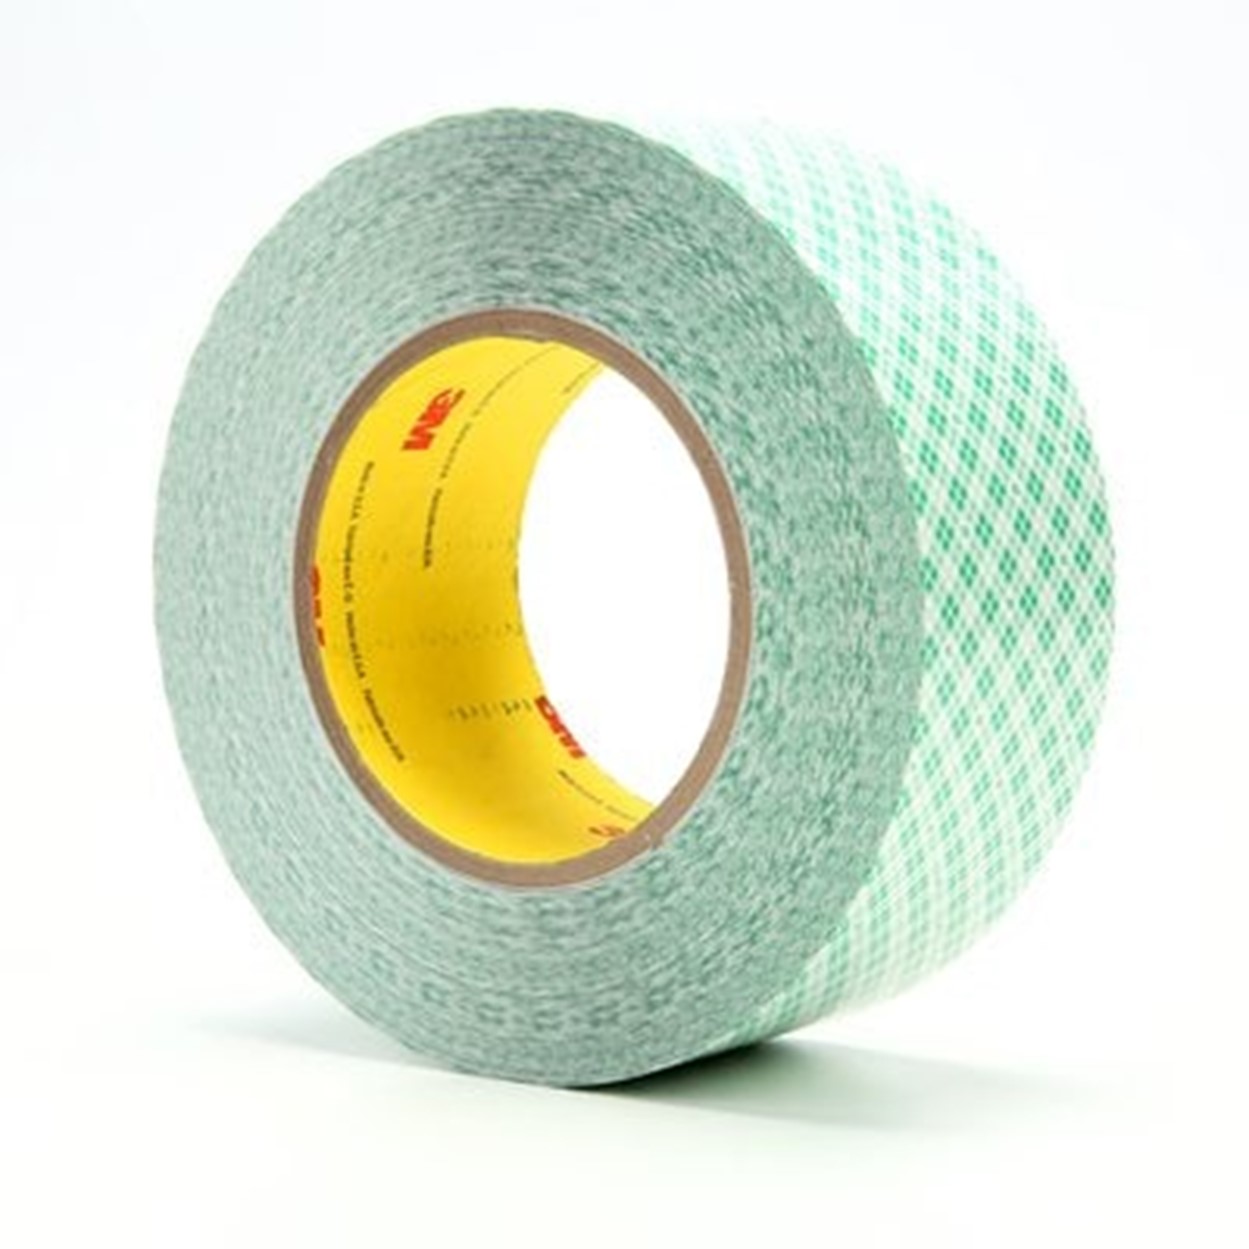 Red Masking Tape, 1/2 x 60 yds., 4.9 Mil Thick for $3.43 Online